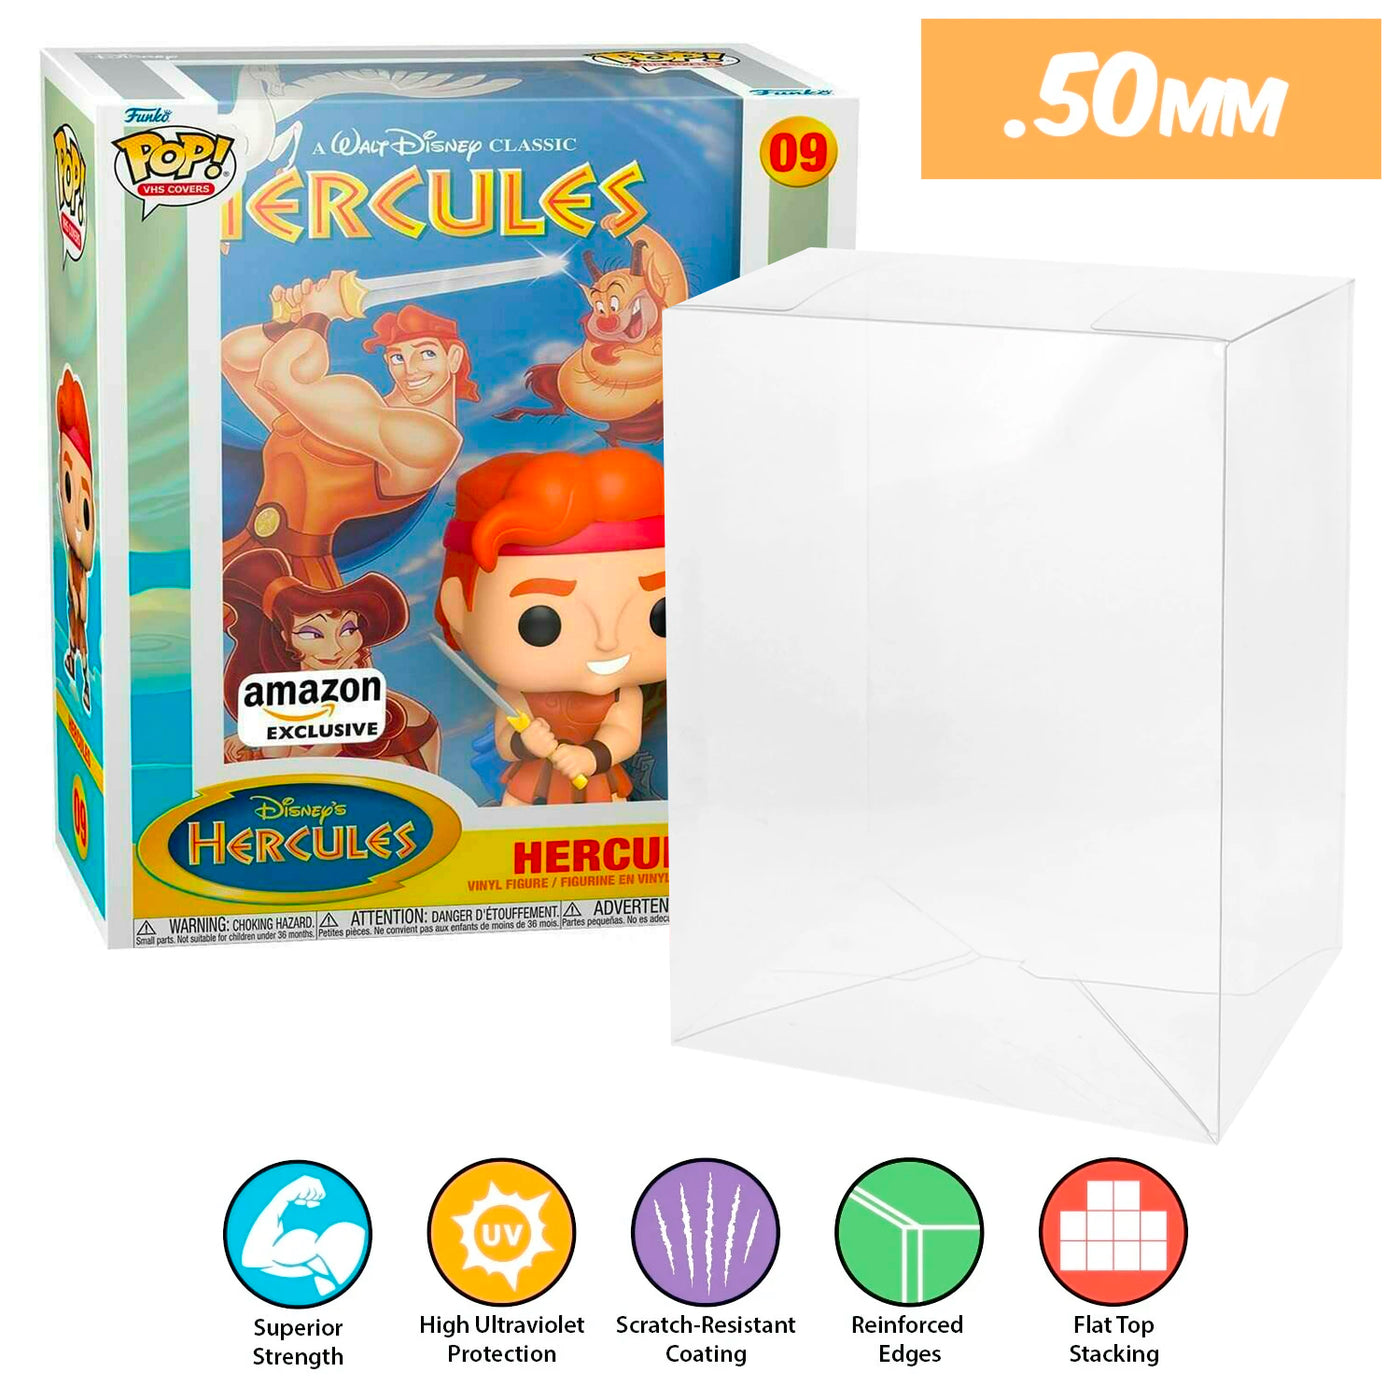 09 hercules amazon pop vhs covers best funko pop protectors thick strong uv scratch flat top stack vinyl display geek plastic shield vaulted eco armor fits collect protect display case kollector protector